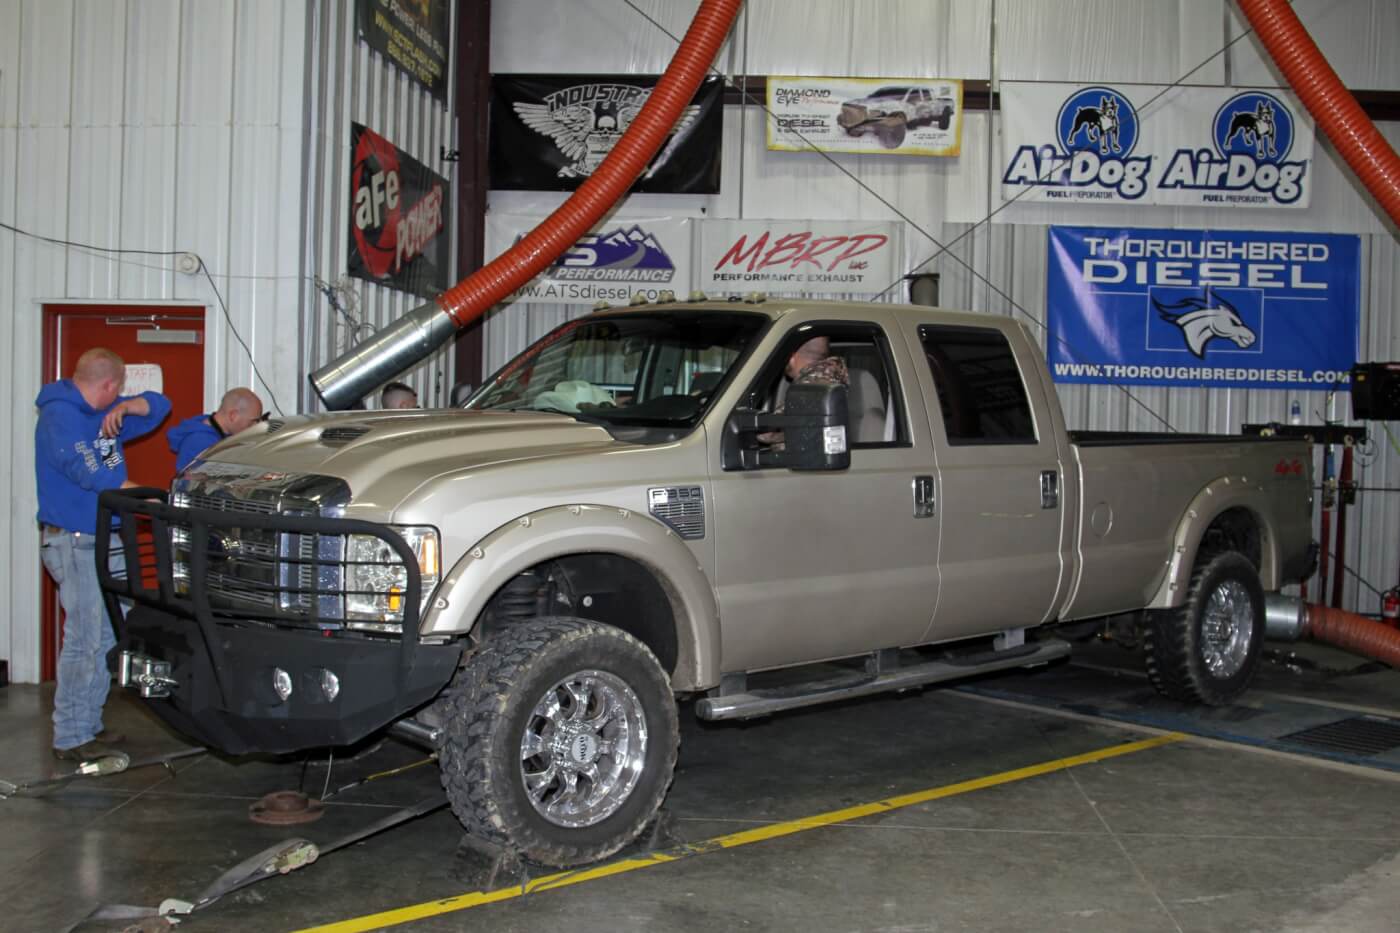 Jonathan Rhoades and his 6.4-liter Power Stroke Ford took home the win in the Stock class by delivering the most torque but only the third-highest horsepower in the class.